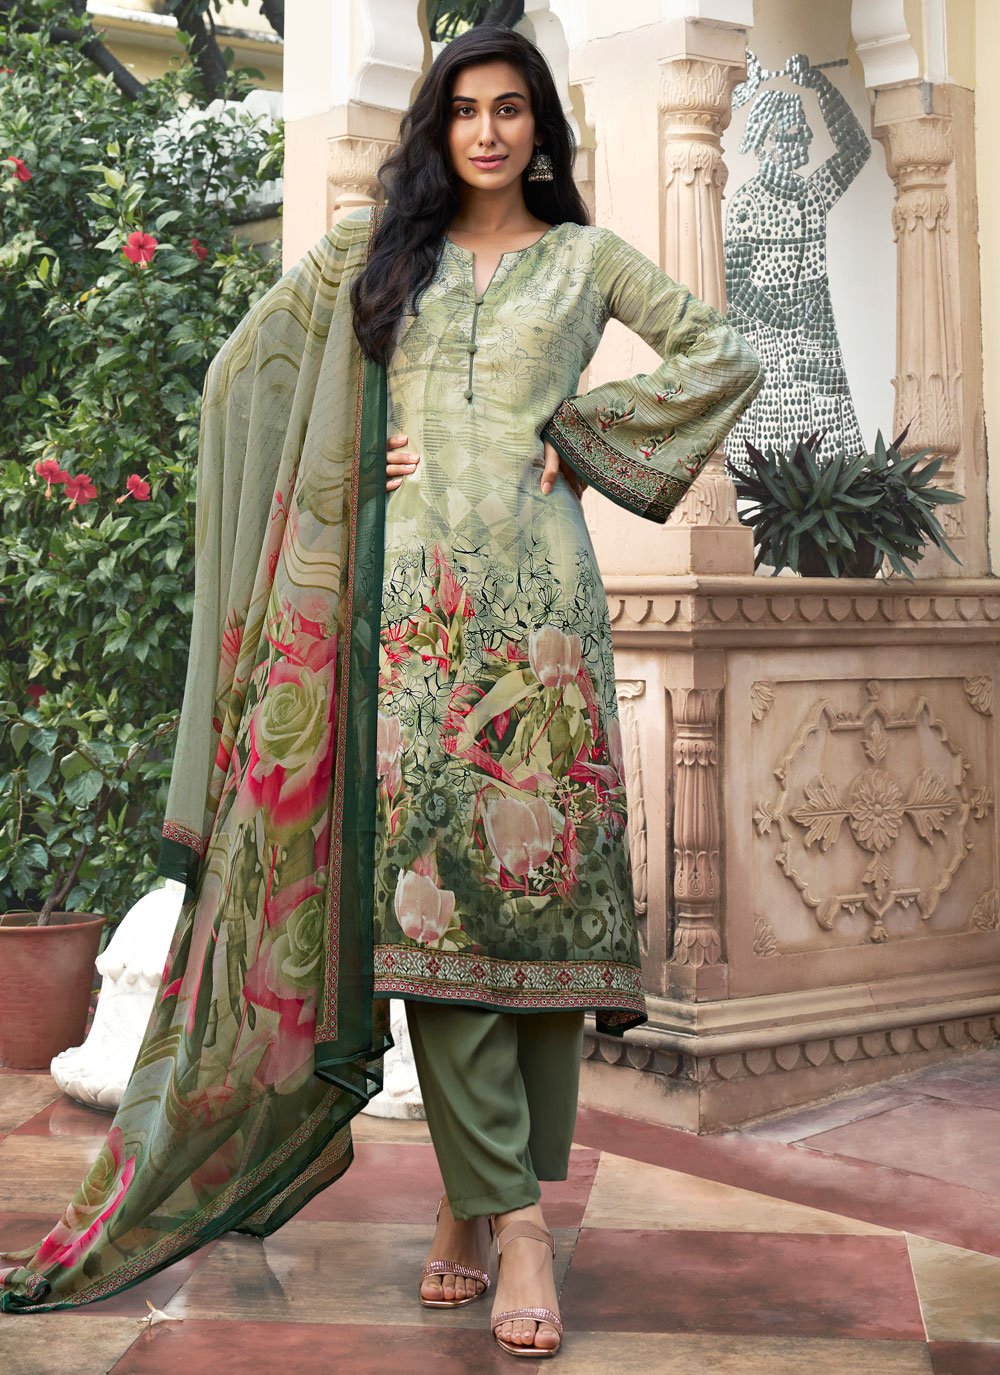 Amazing Multi Colored Casual Wear Printed Crepe Salwar Suit | Salwar suits,  Casual wear, Salwar suits party wear